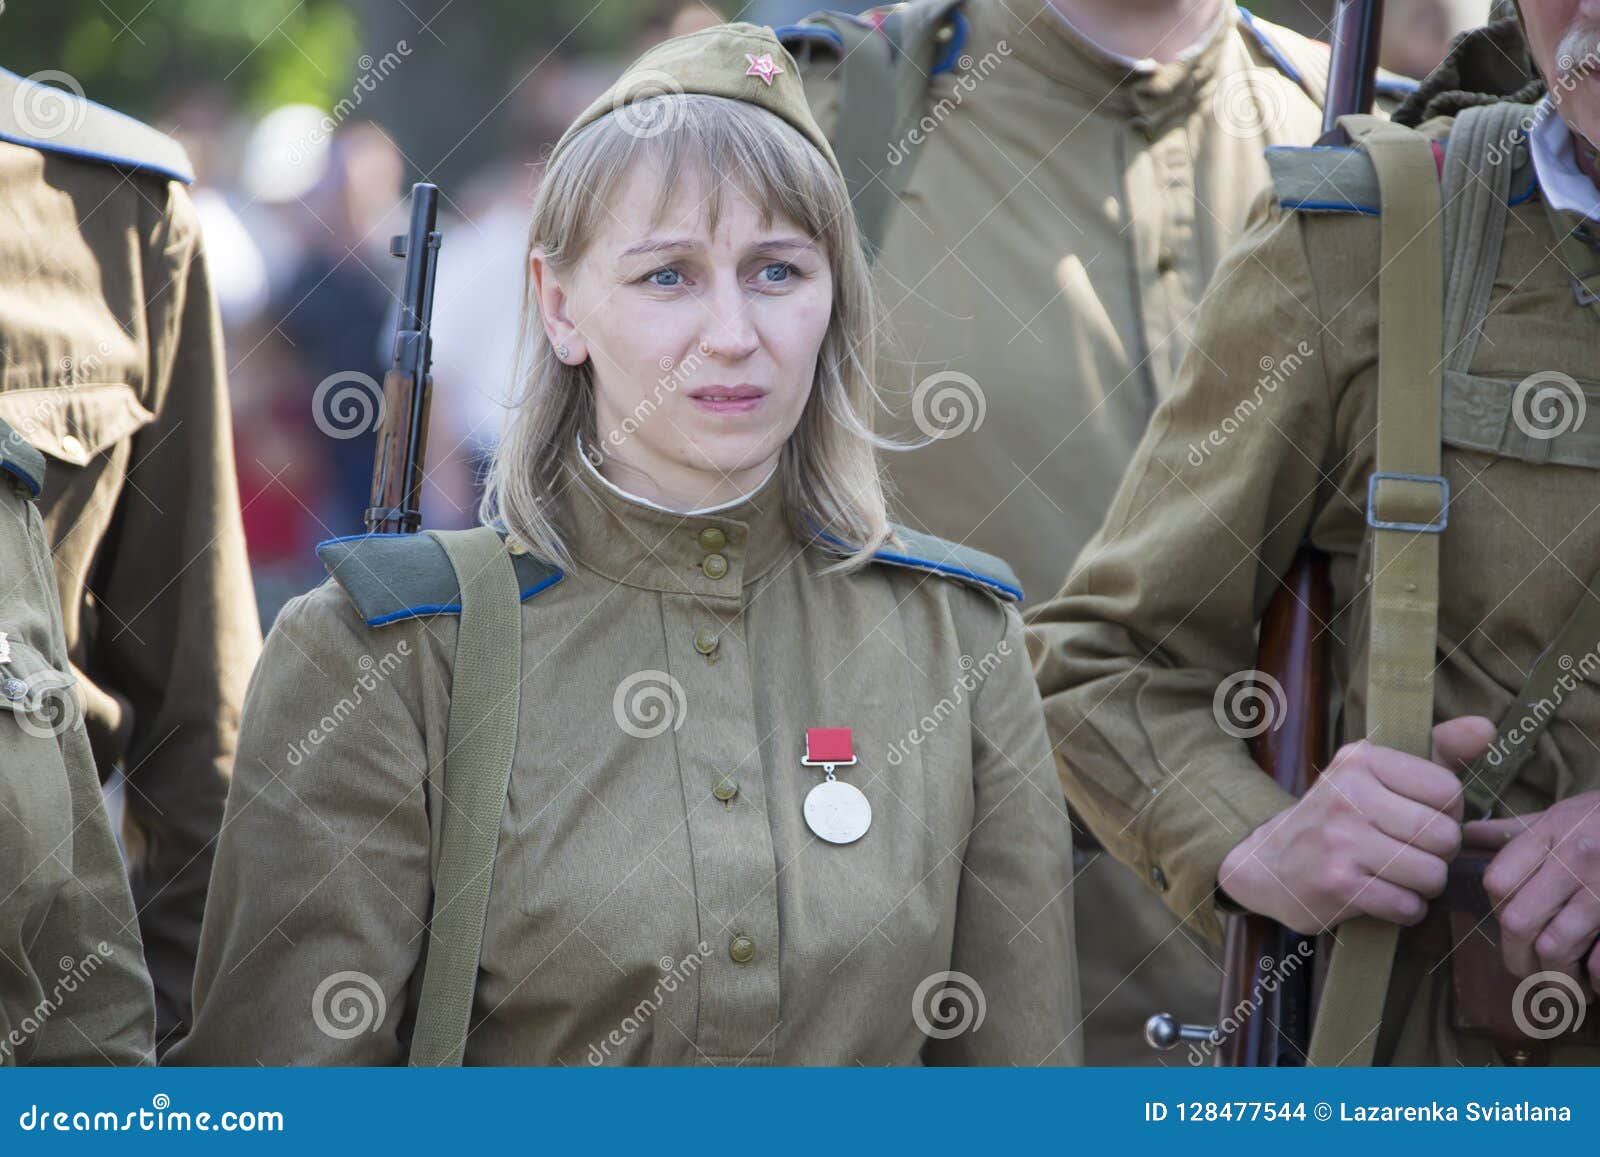 Russian soldier editorial stock image. Image of blonde - 128477544